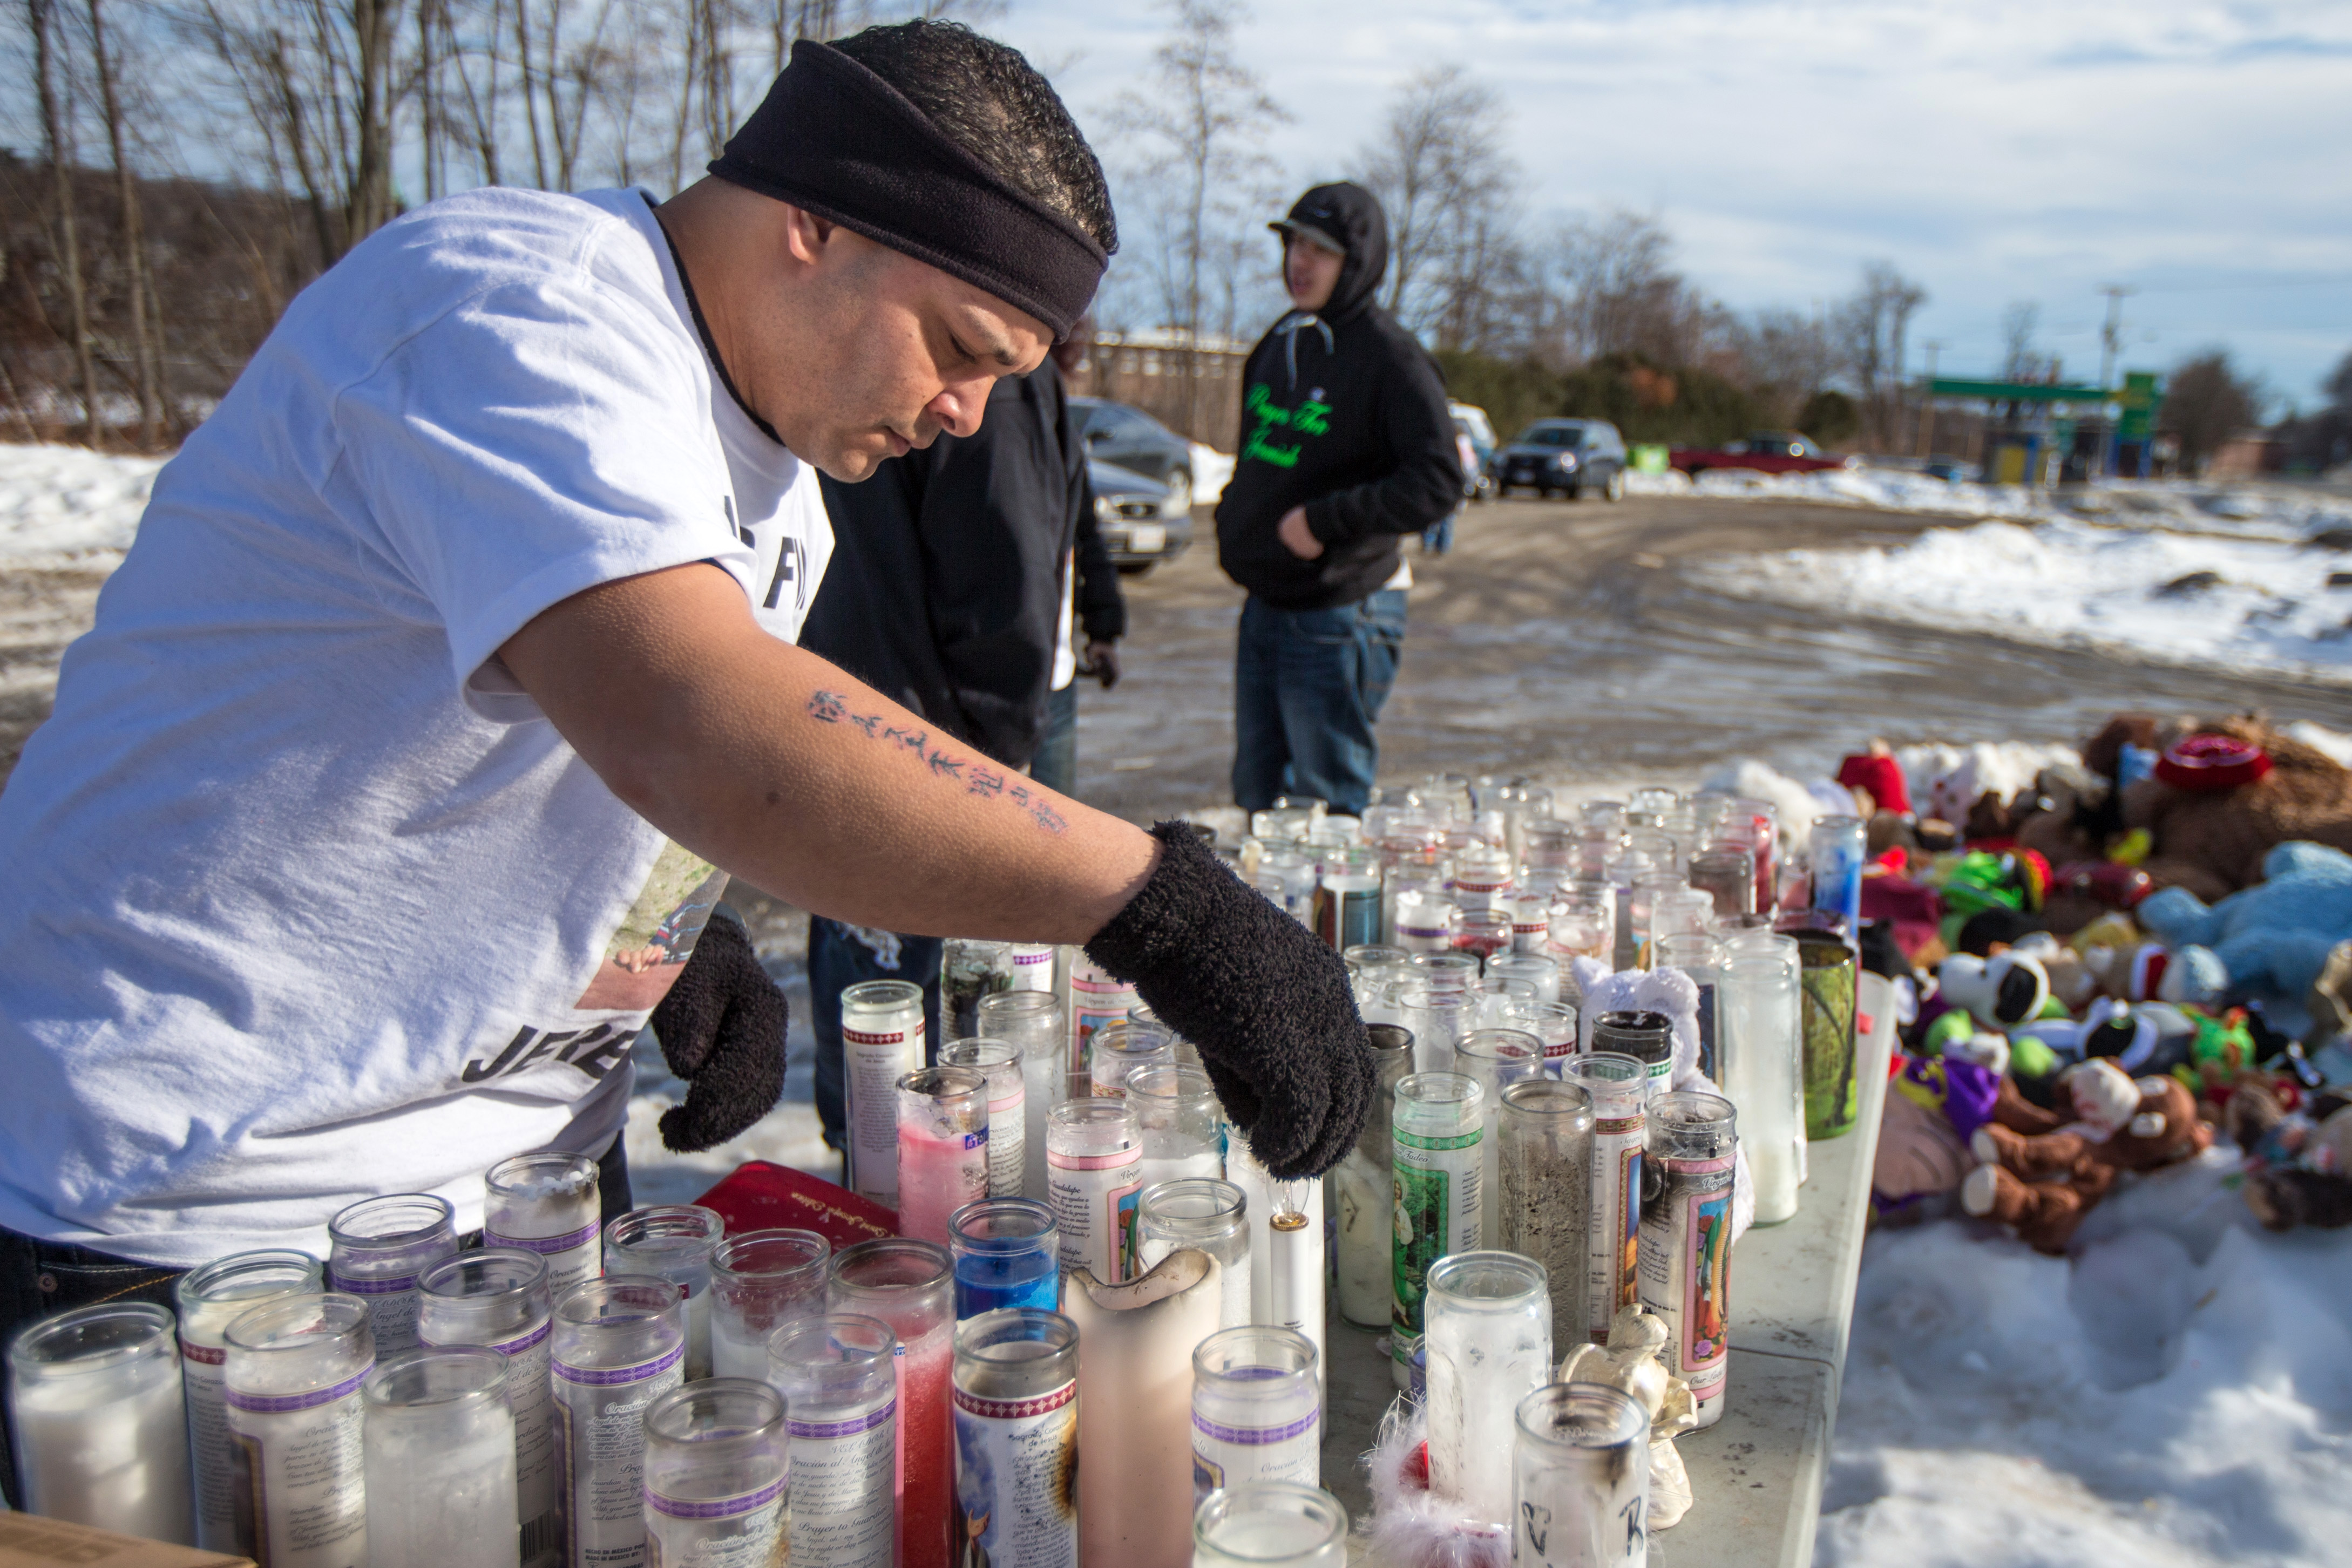 Jose Oliver visited a memorial of toys and candles set up in front of 276 Kimball Street in Fitchburg after the disappearance of his son, Jeremiah Oliver. (Photograph by Aram Boghosian—Getty/The Boston Globe)